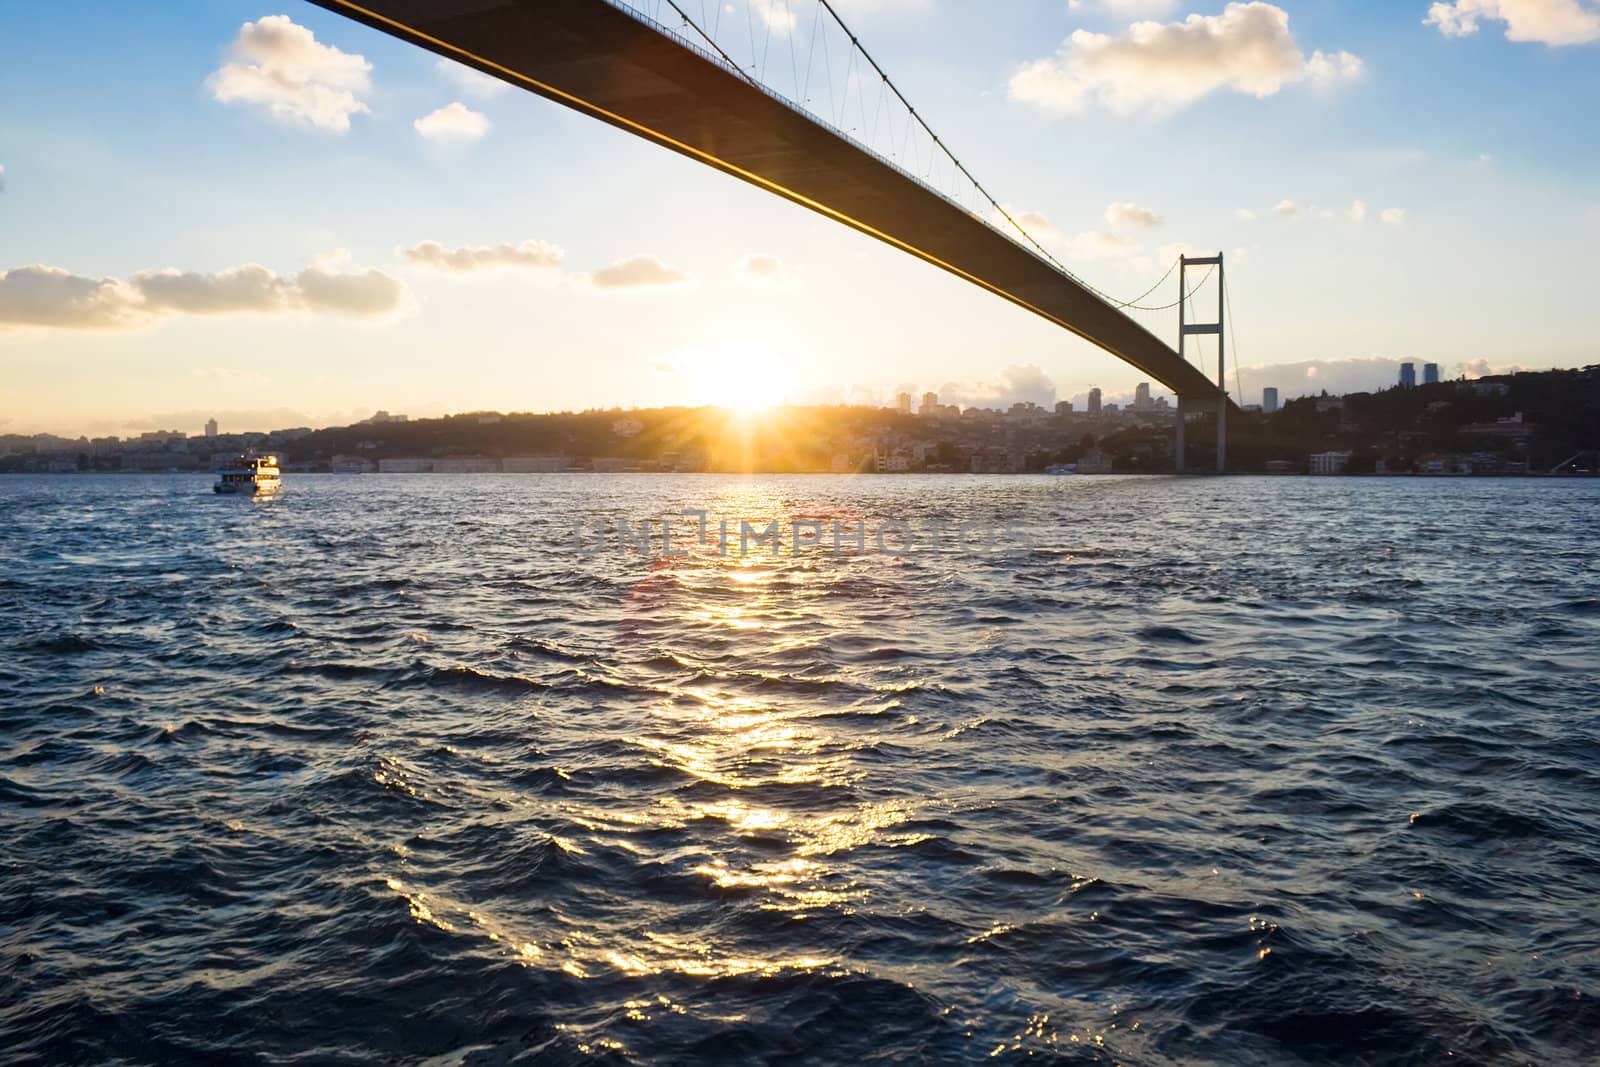 The Bosphorus Bridge which connects Europe and Asia